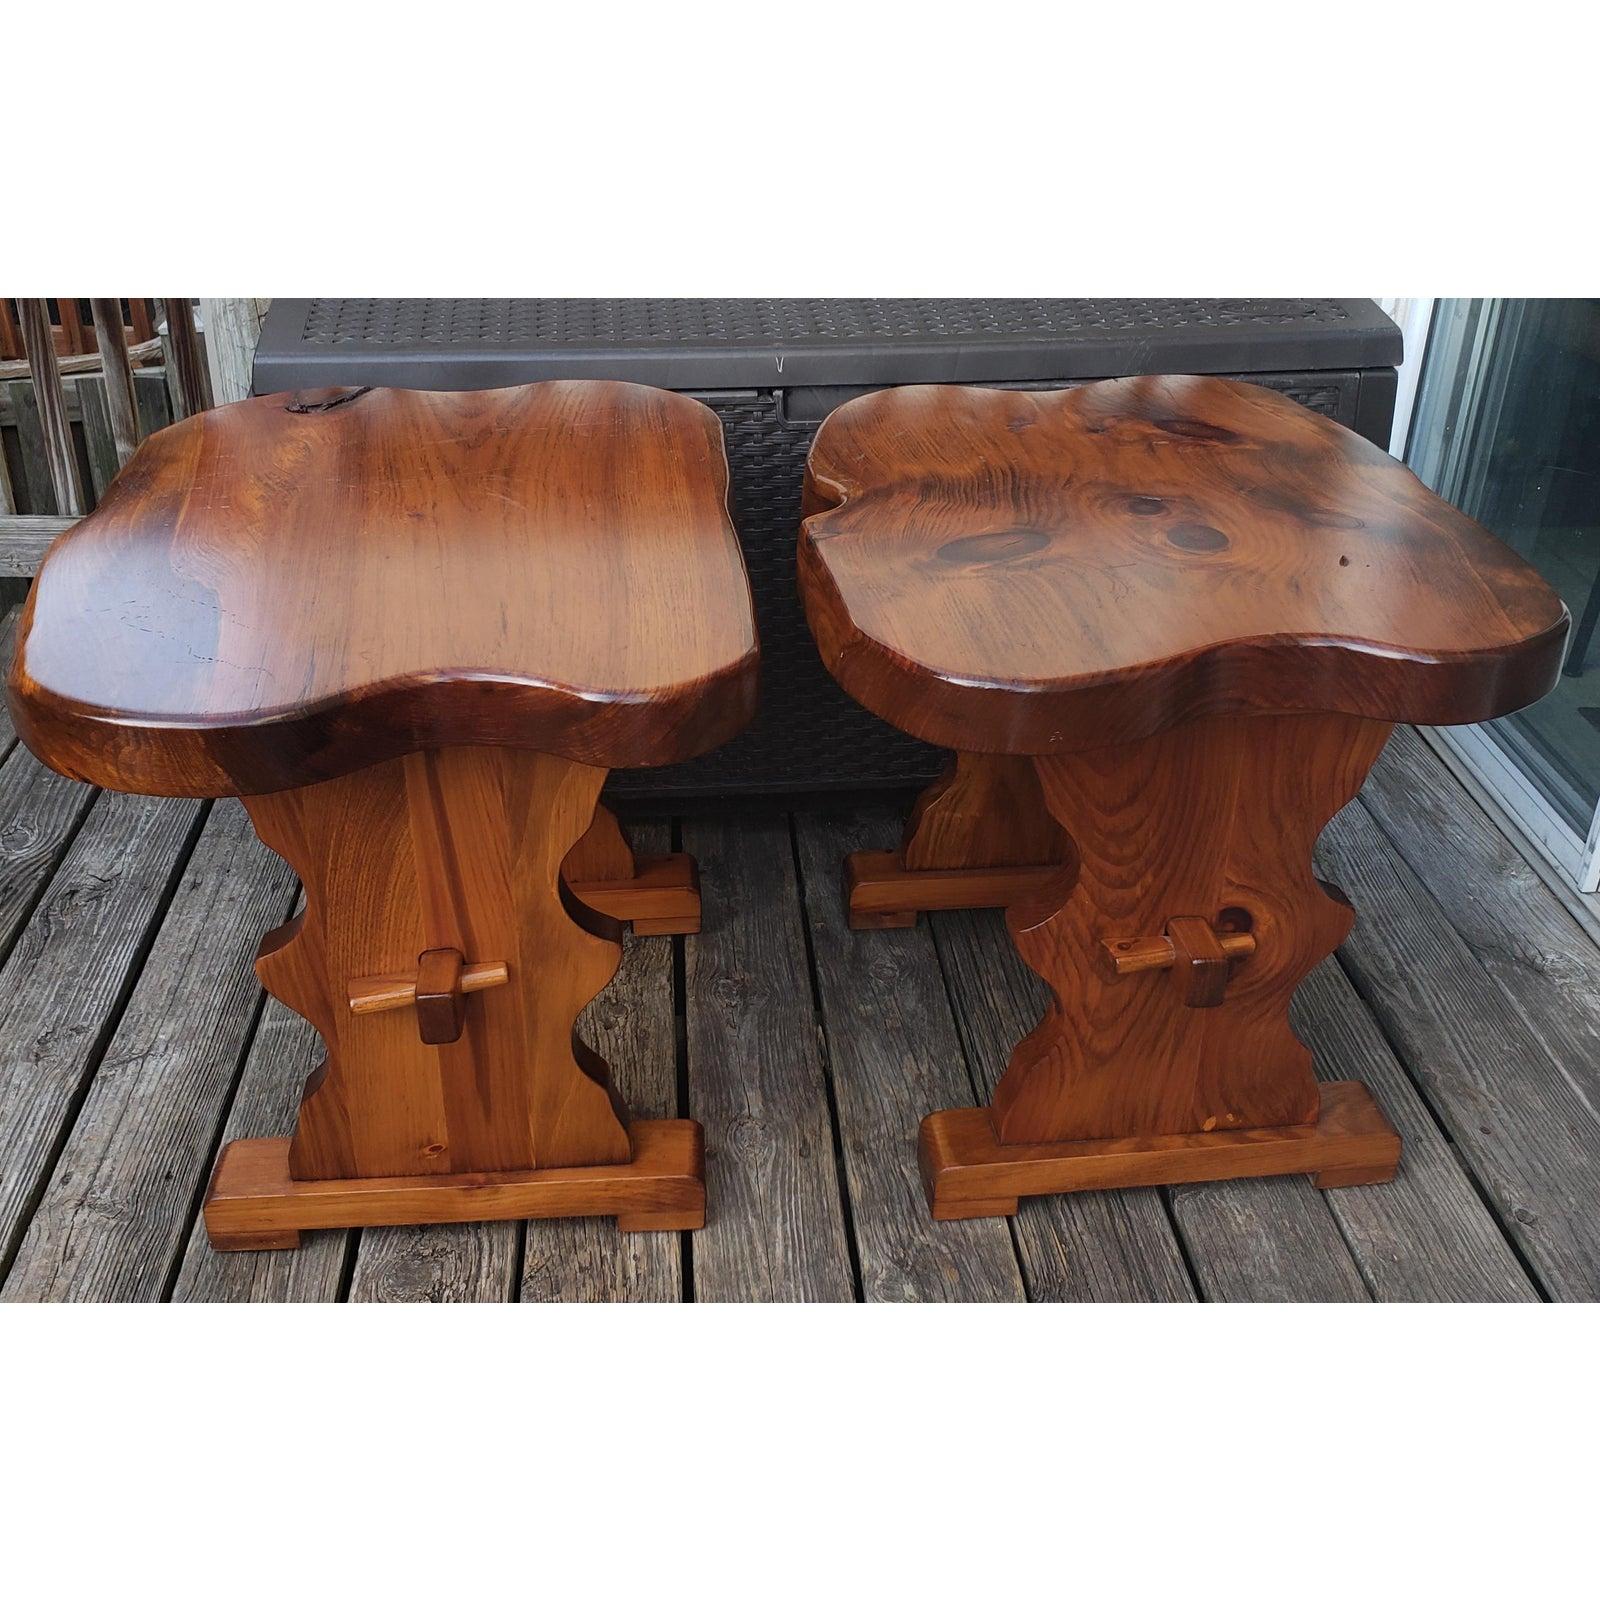 Hand-Crafted 1980s Handcrafted Polished Walnut Pine Wood Slabs Trestle Side Tables, a Pair For Sale